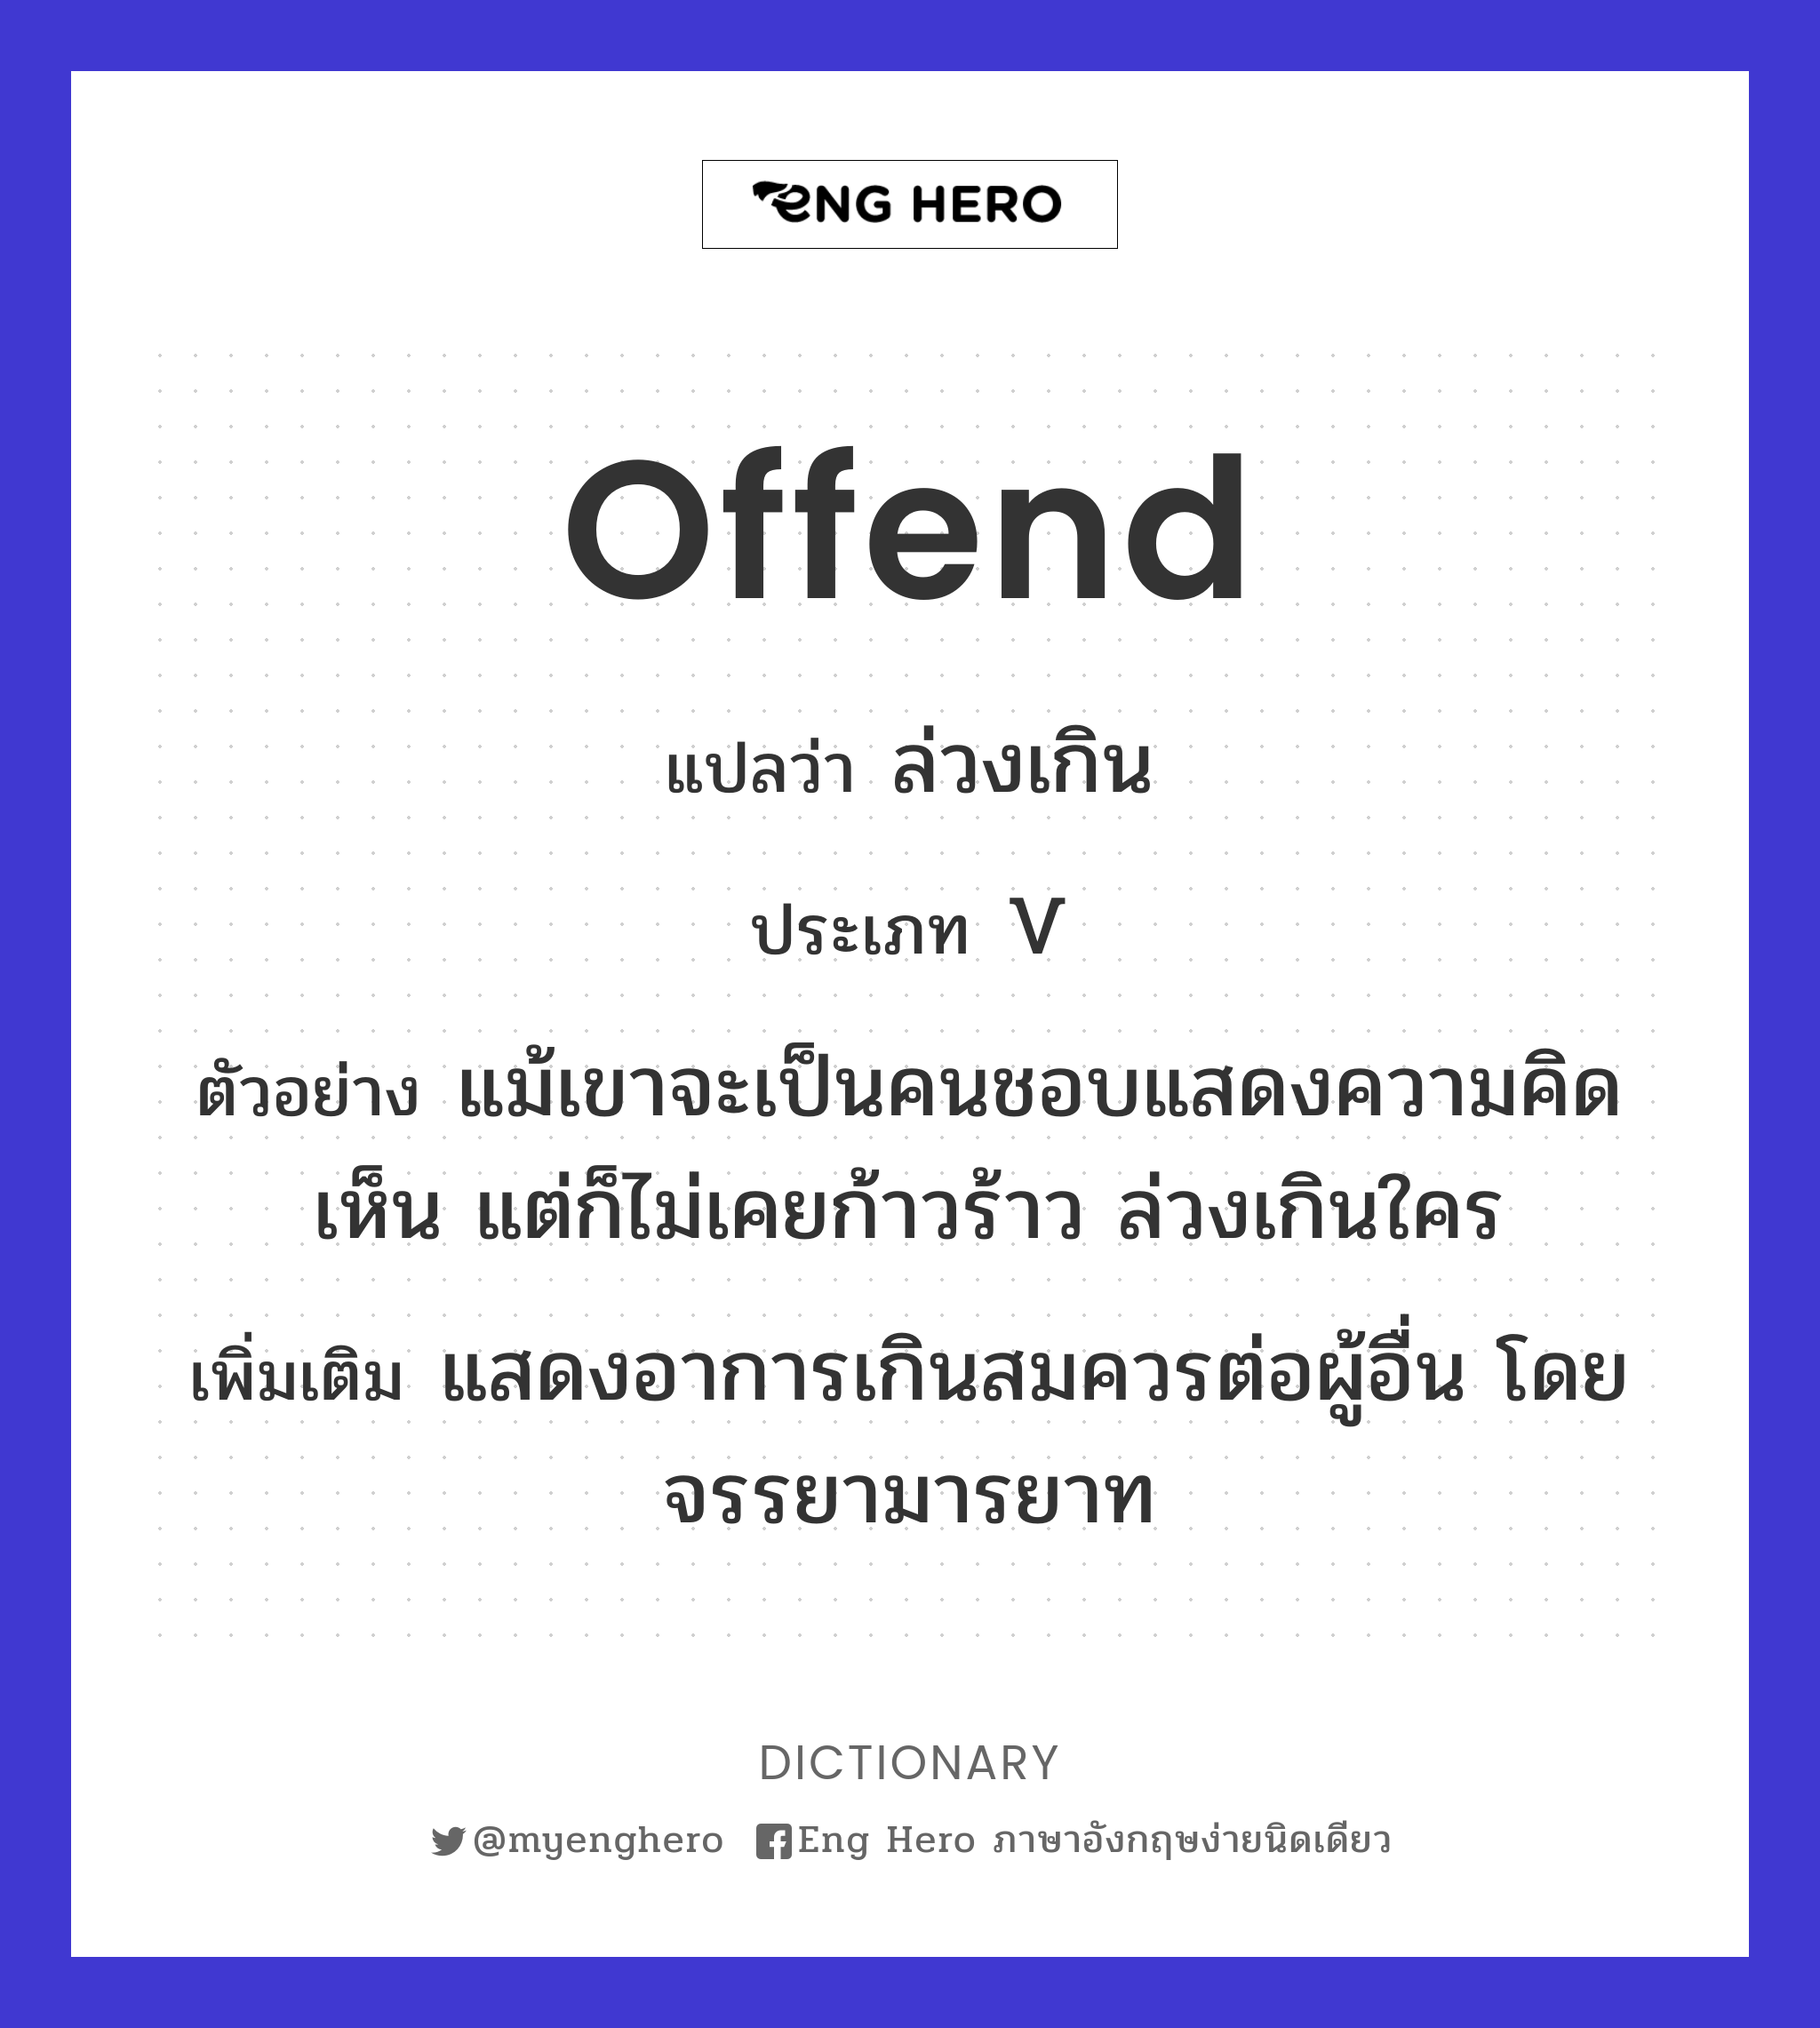 offend